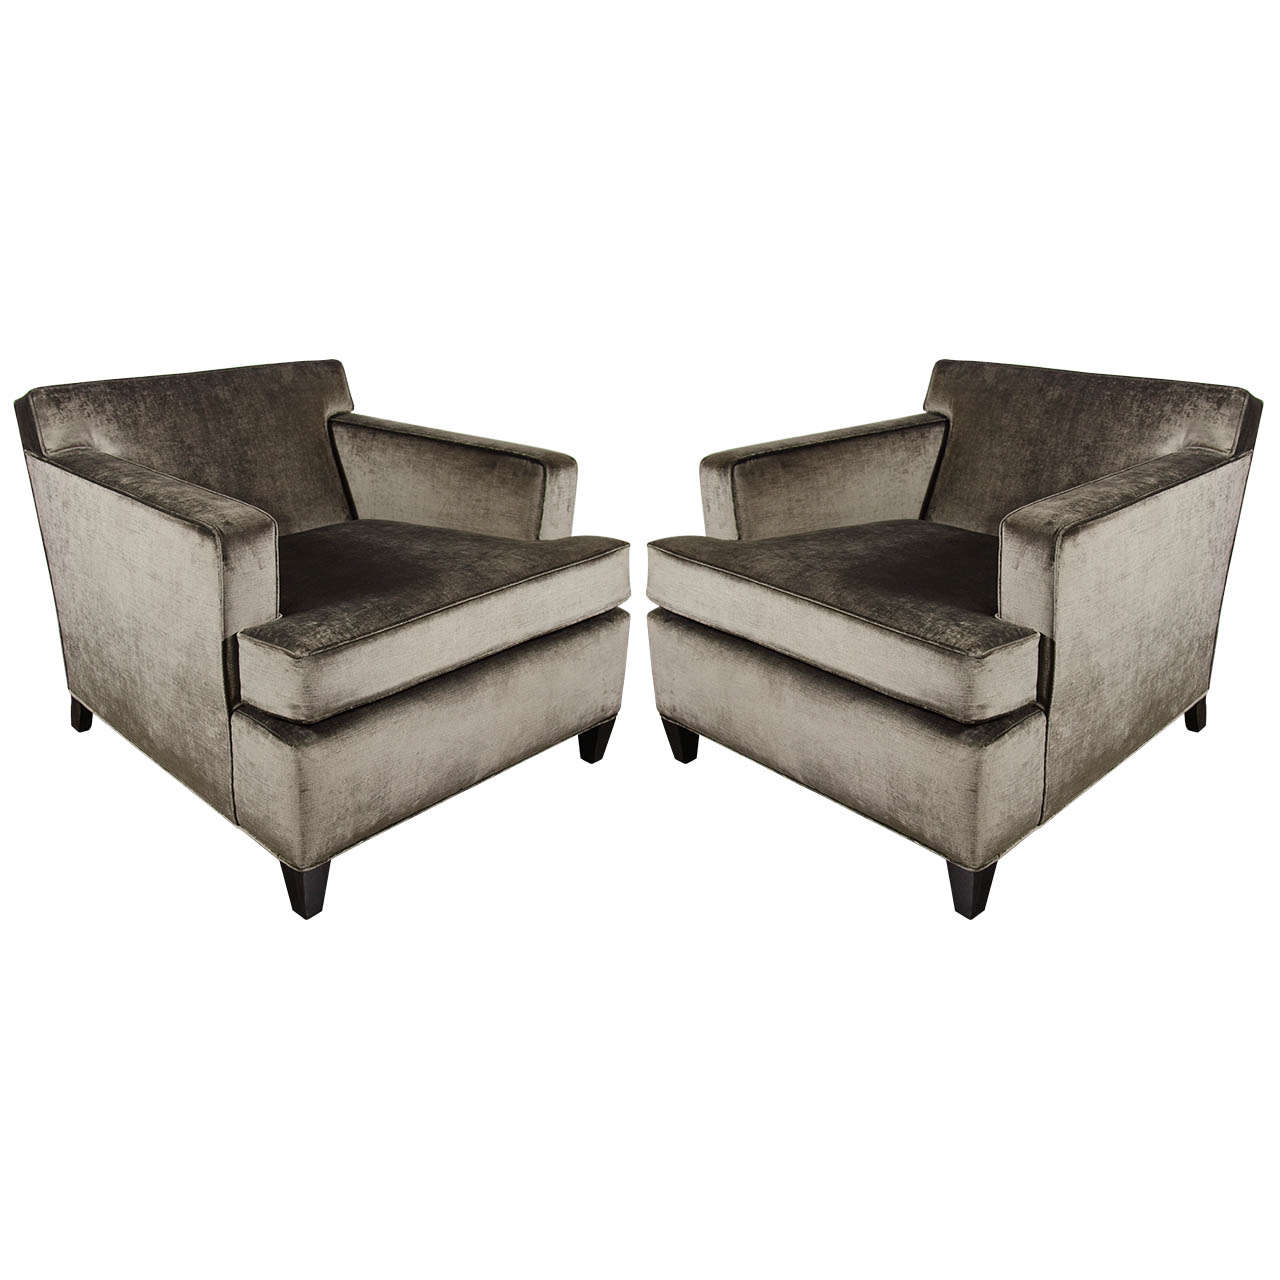 Lux Pair of Art Deco Cubist Club/Lounge Chairs